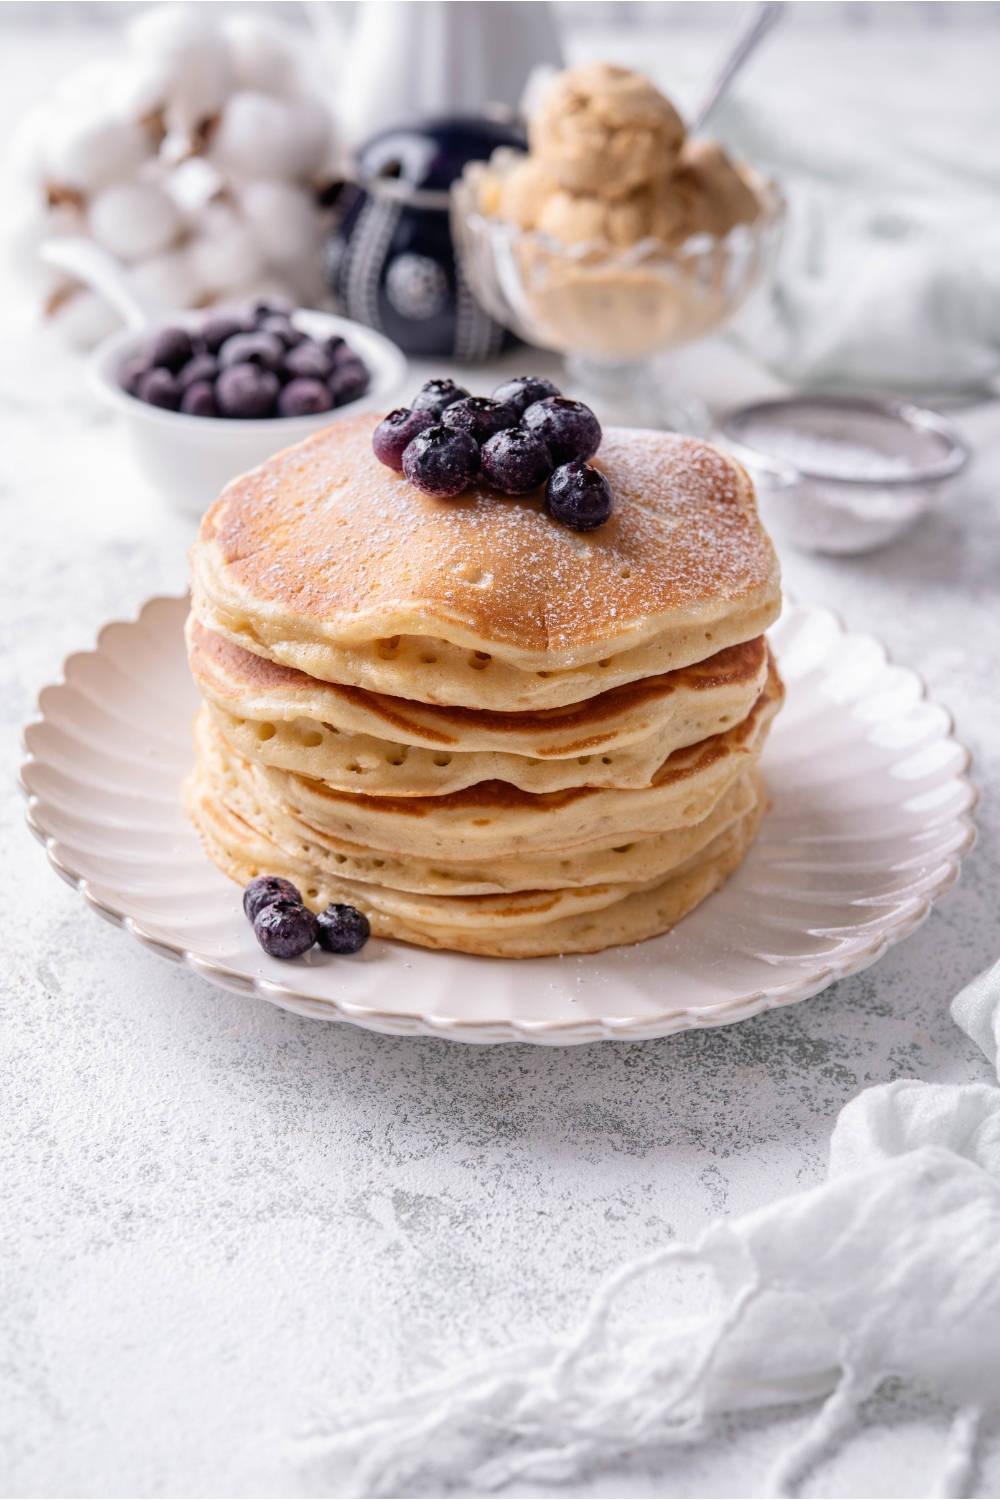 A stack of six pancakes on a white plate with blueberries on top.